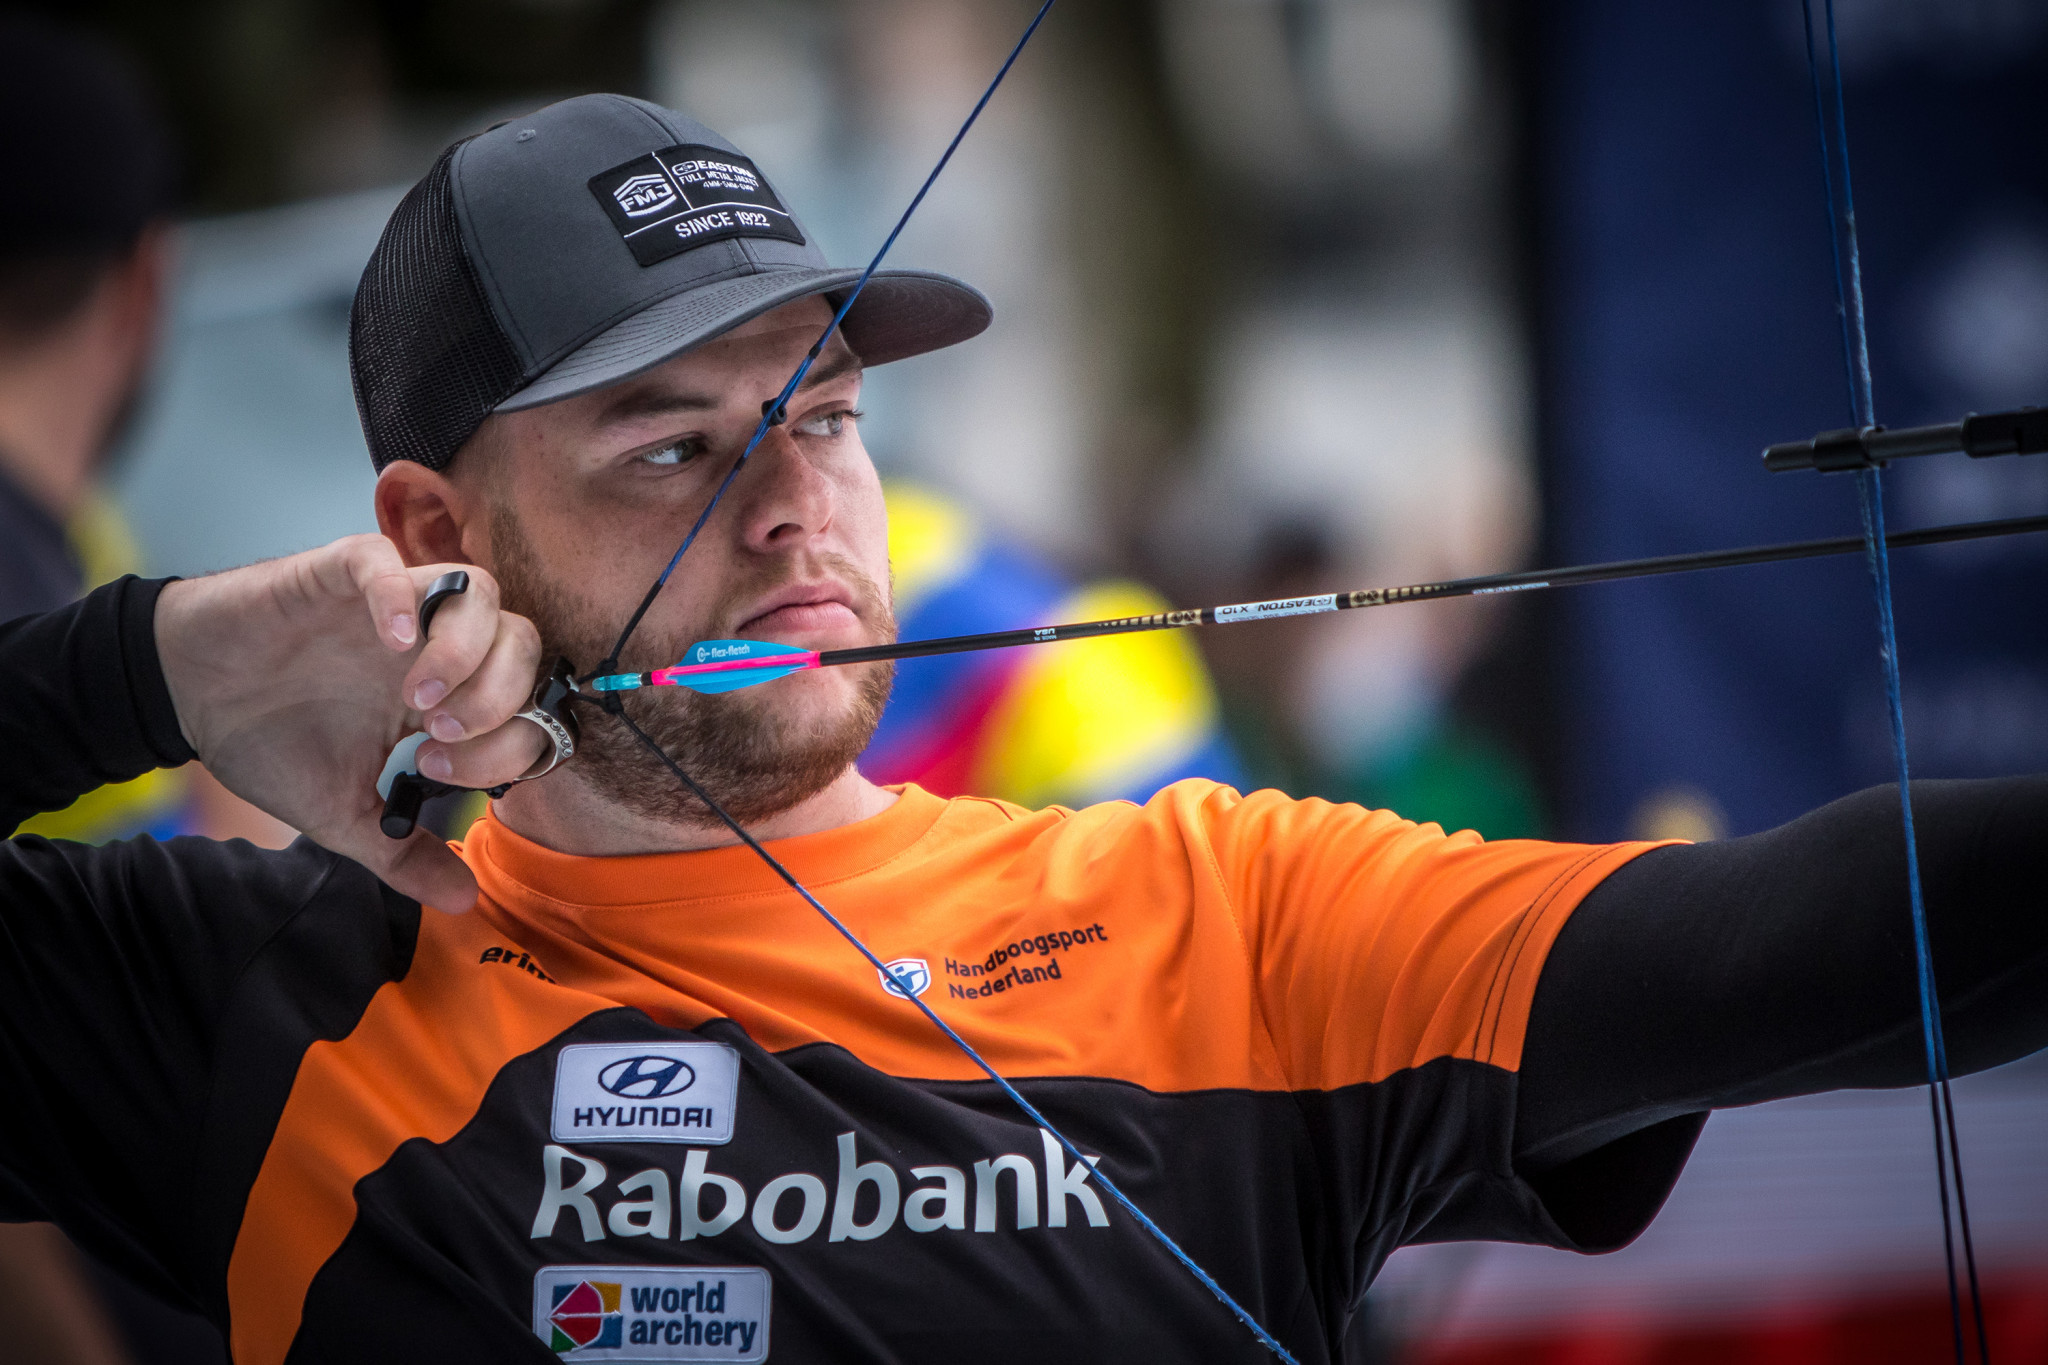 Estonia and The Netherlands win first bronze medals of new Archery World Cup season